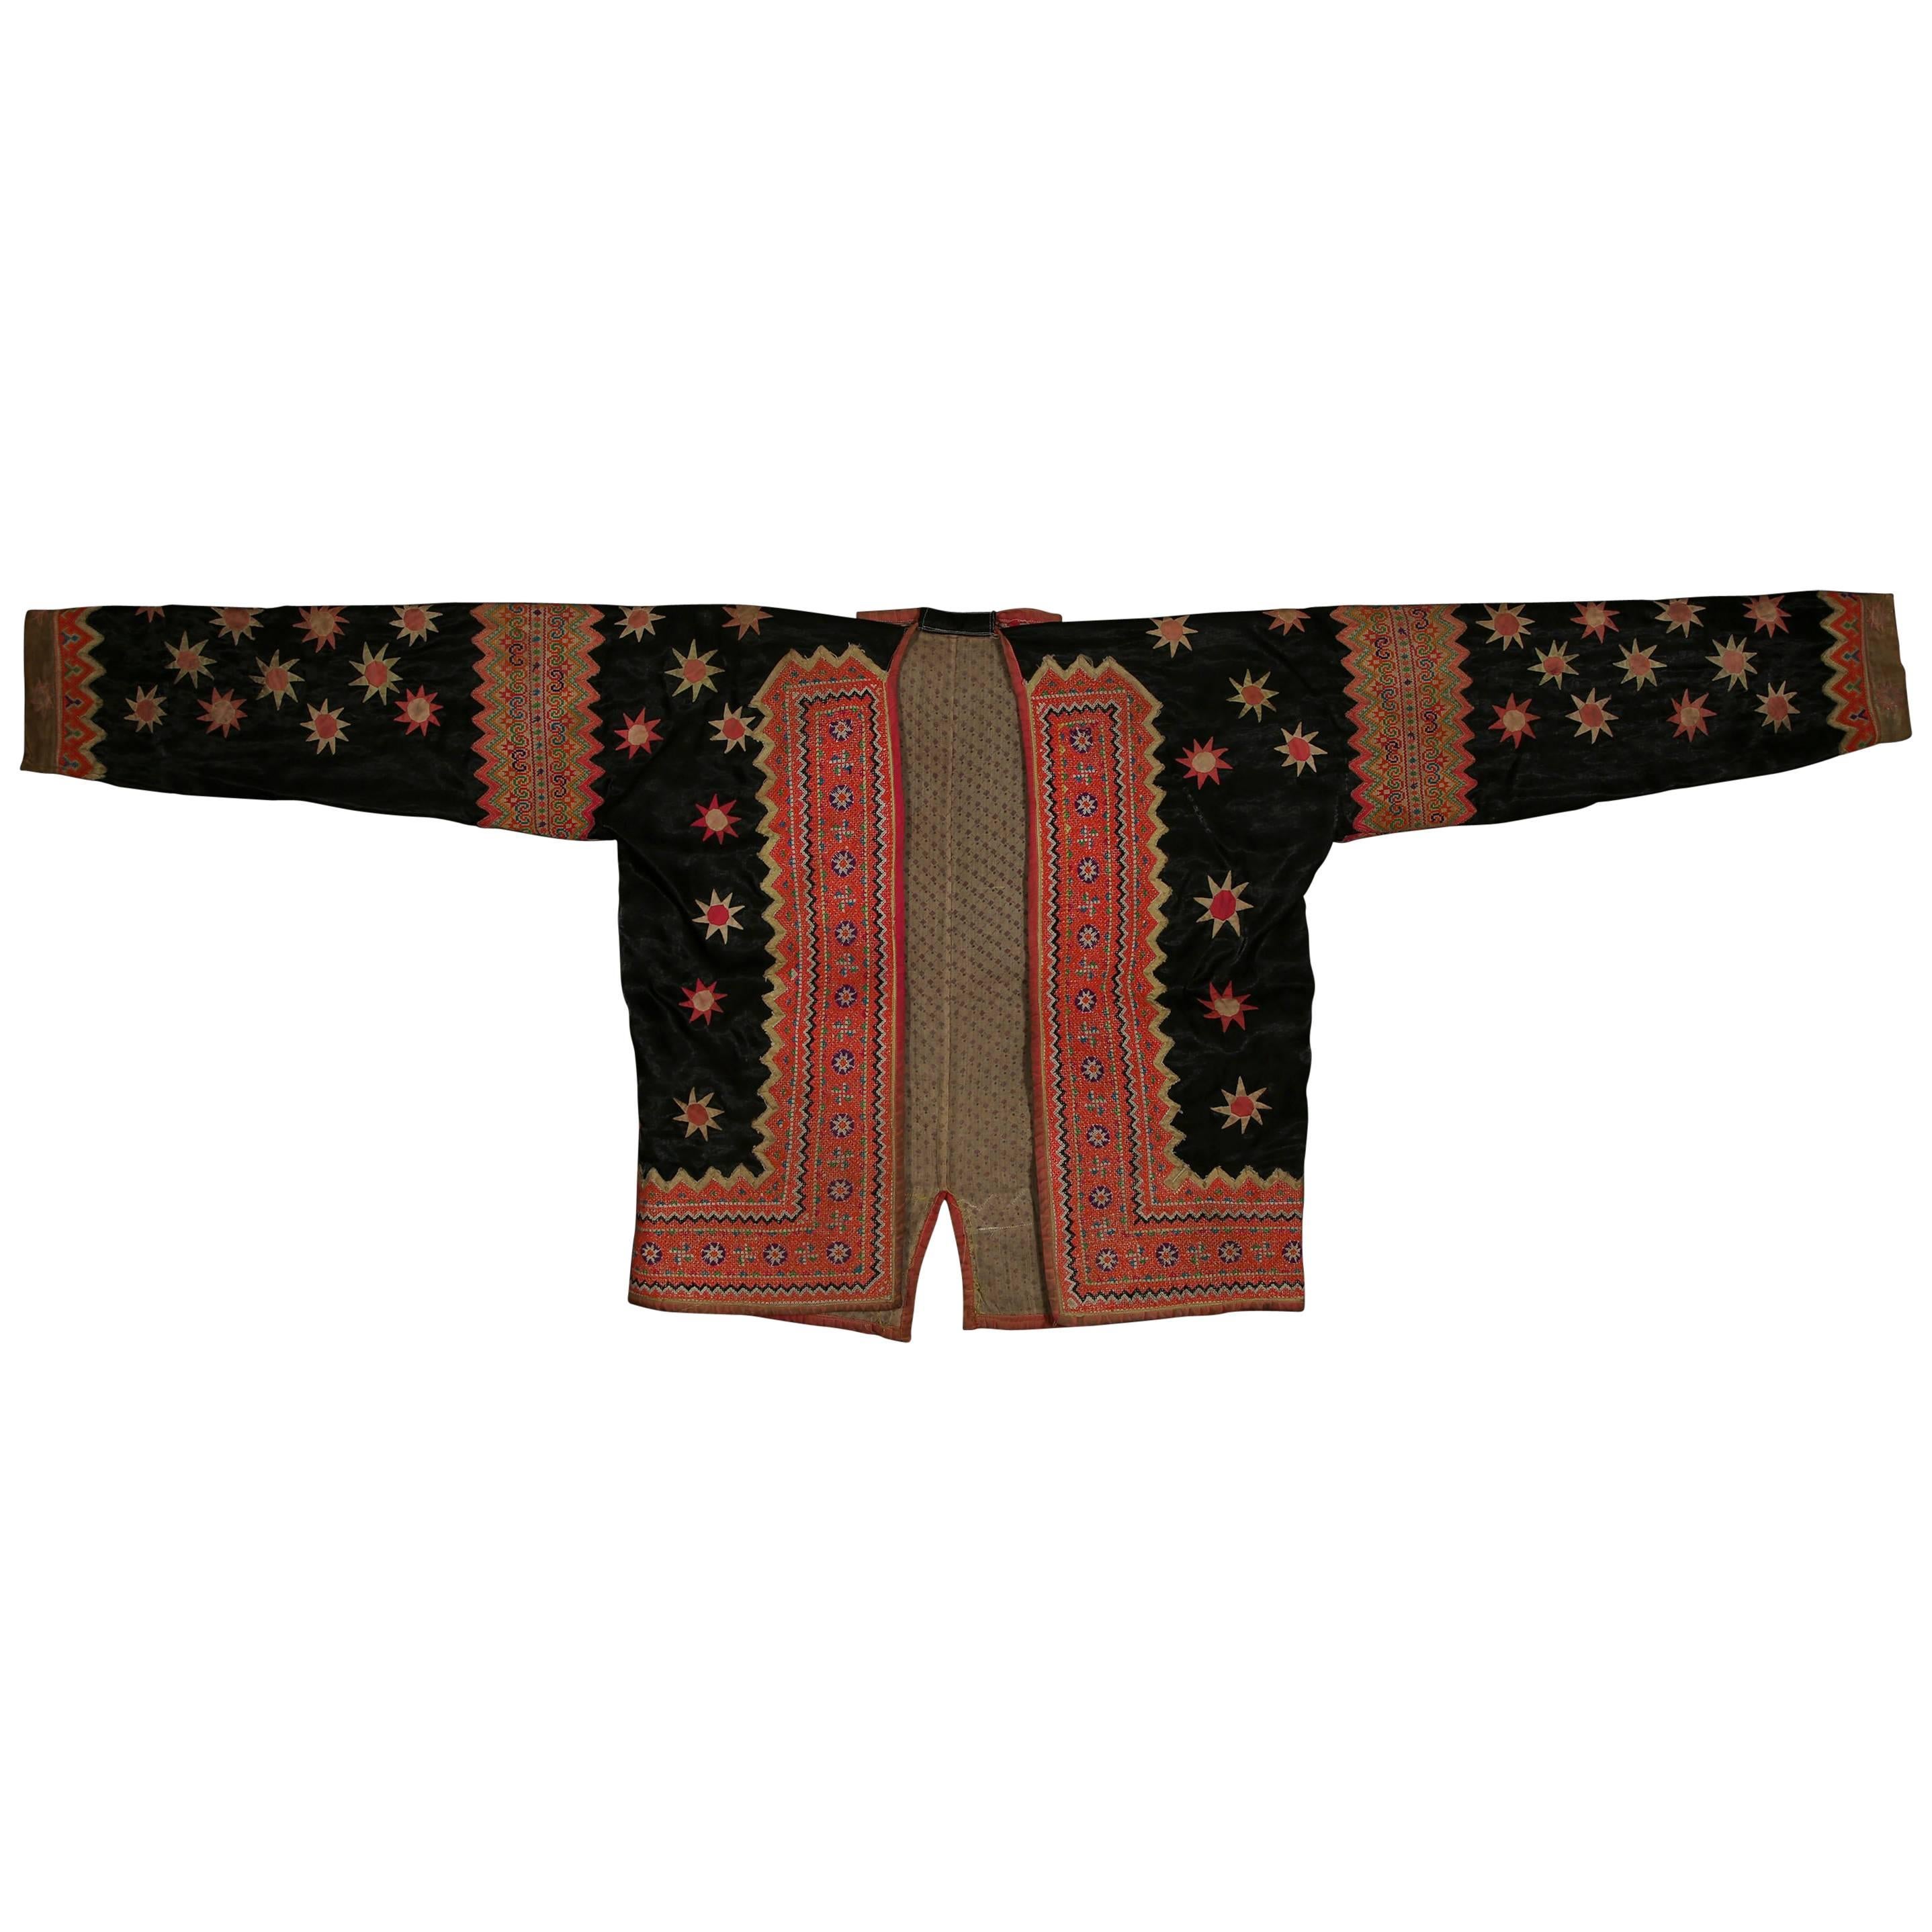 Black Star Jacket from the Hmong People, Laos, Early 20th Century